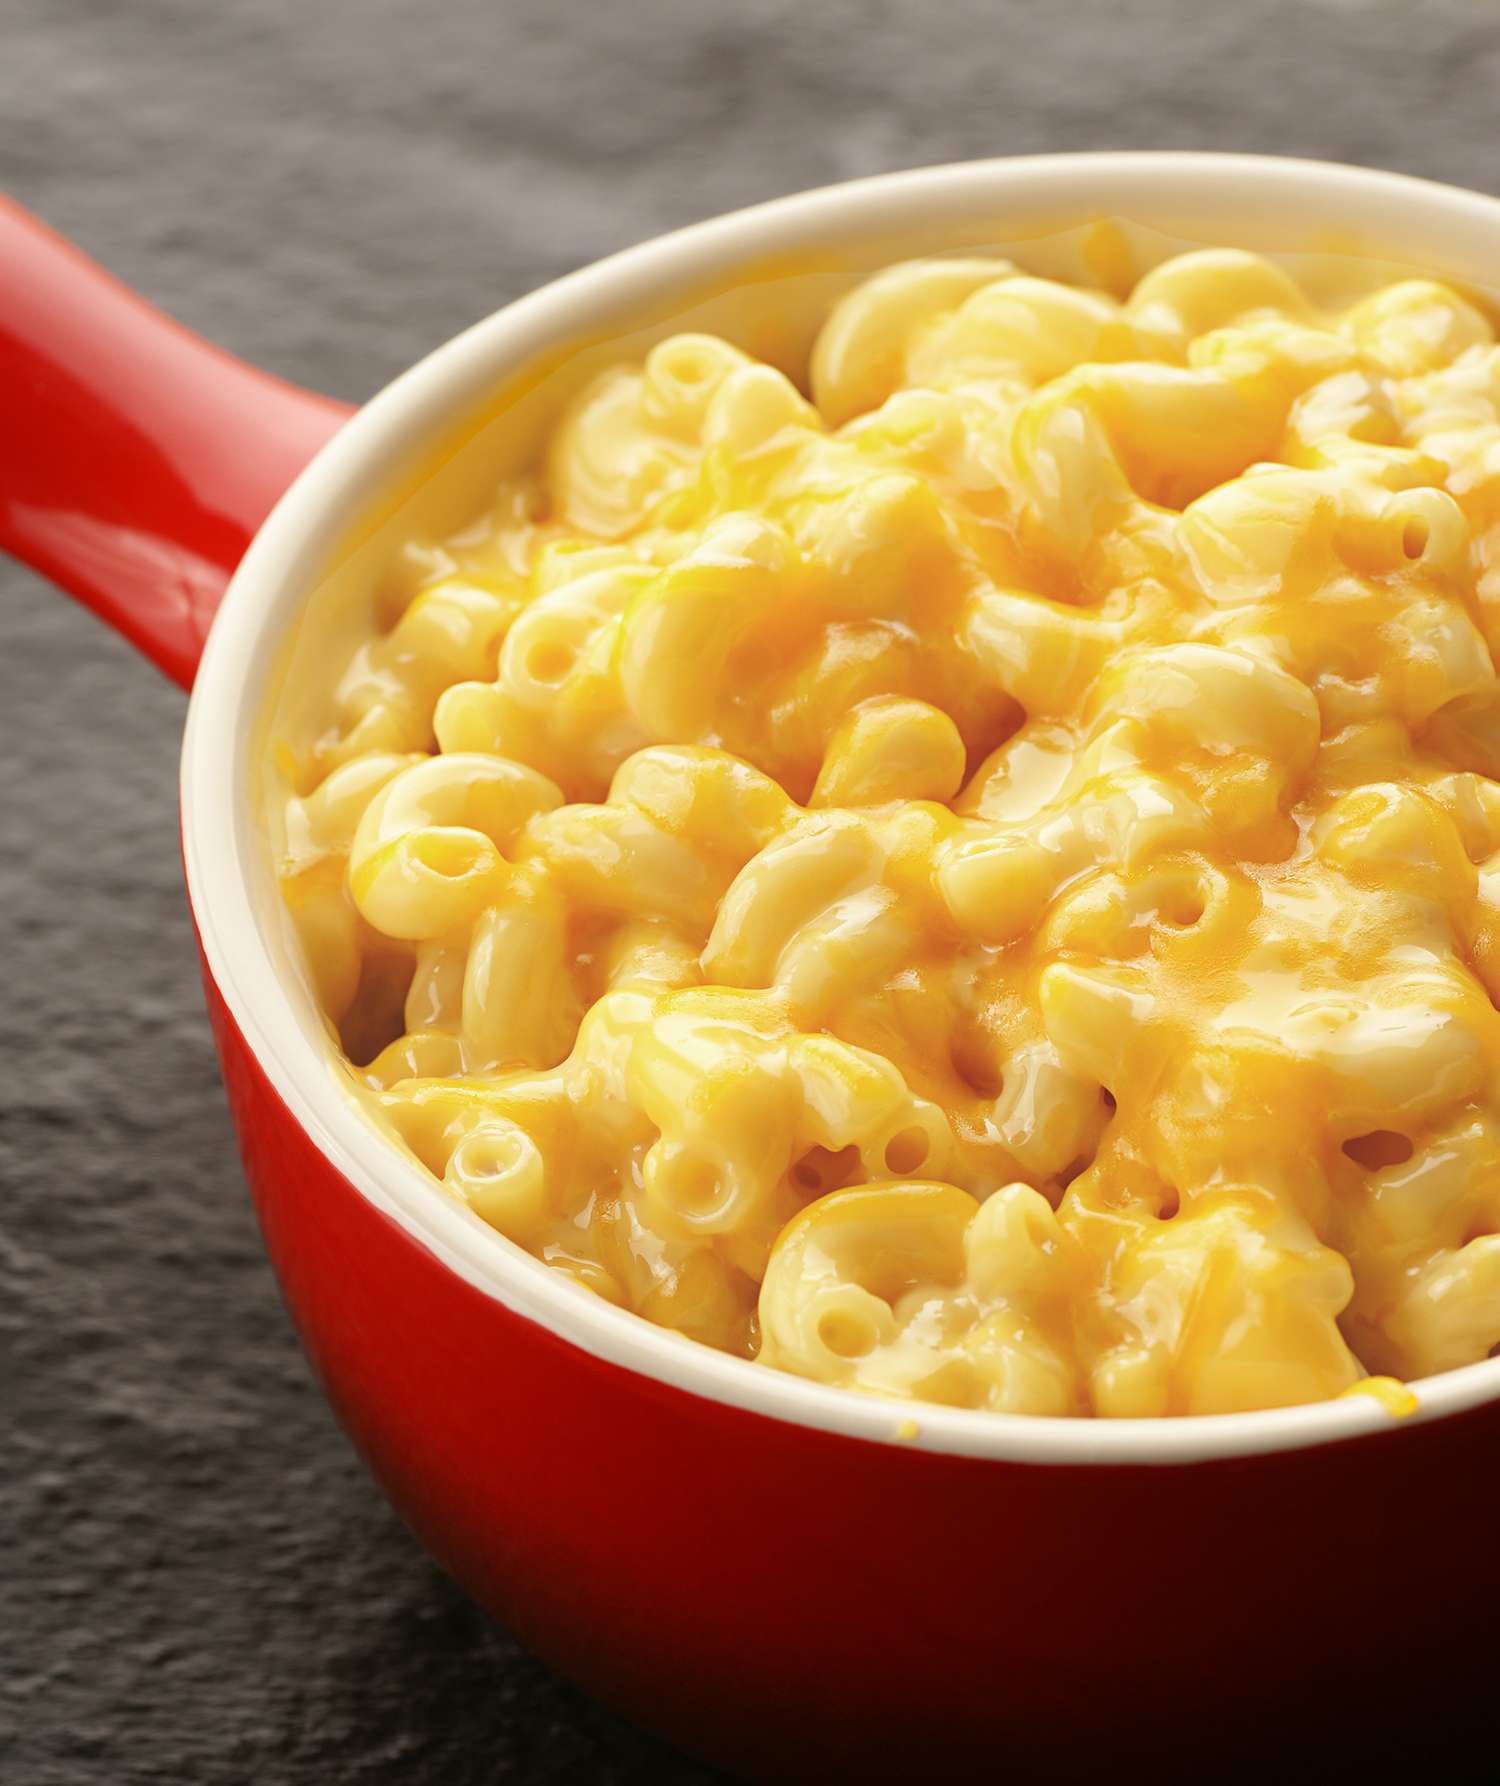 Mac and cheese is one of those recipes that can take on so many different f...